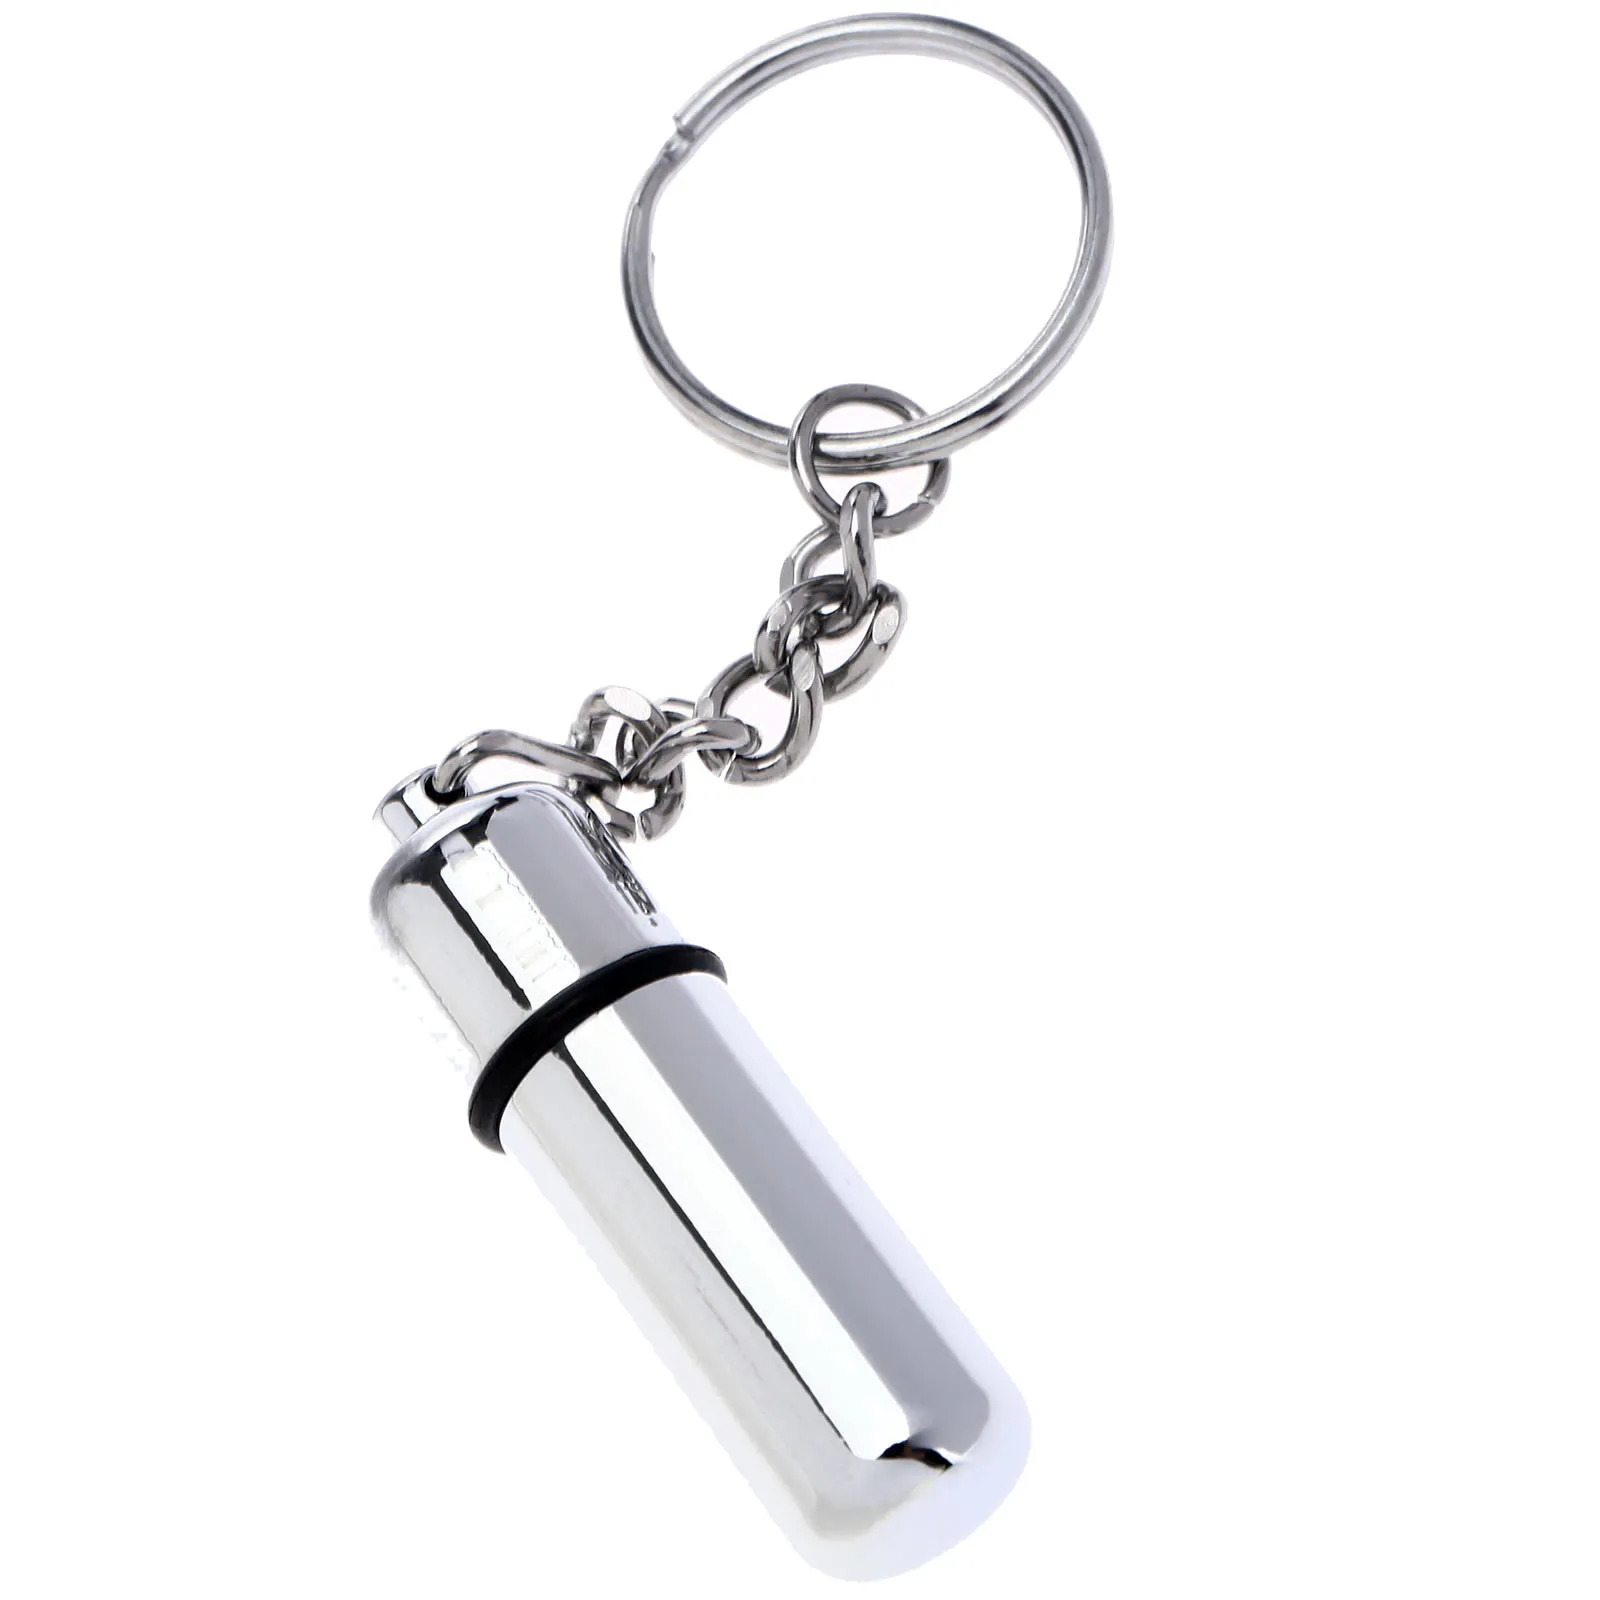 Portable Stainless Steel Cigar Punch Cutter with KeyRing Key Chain 